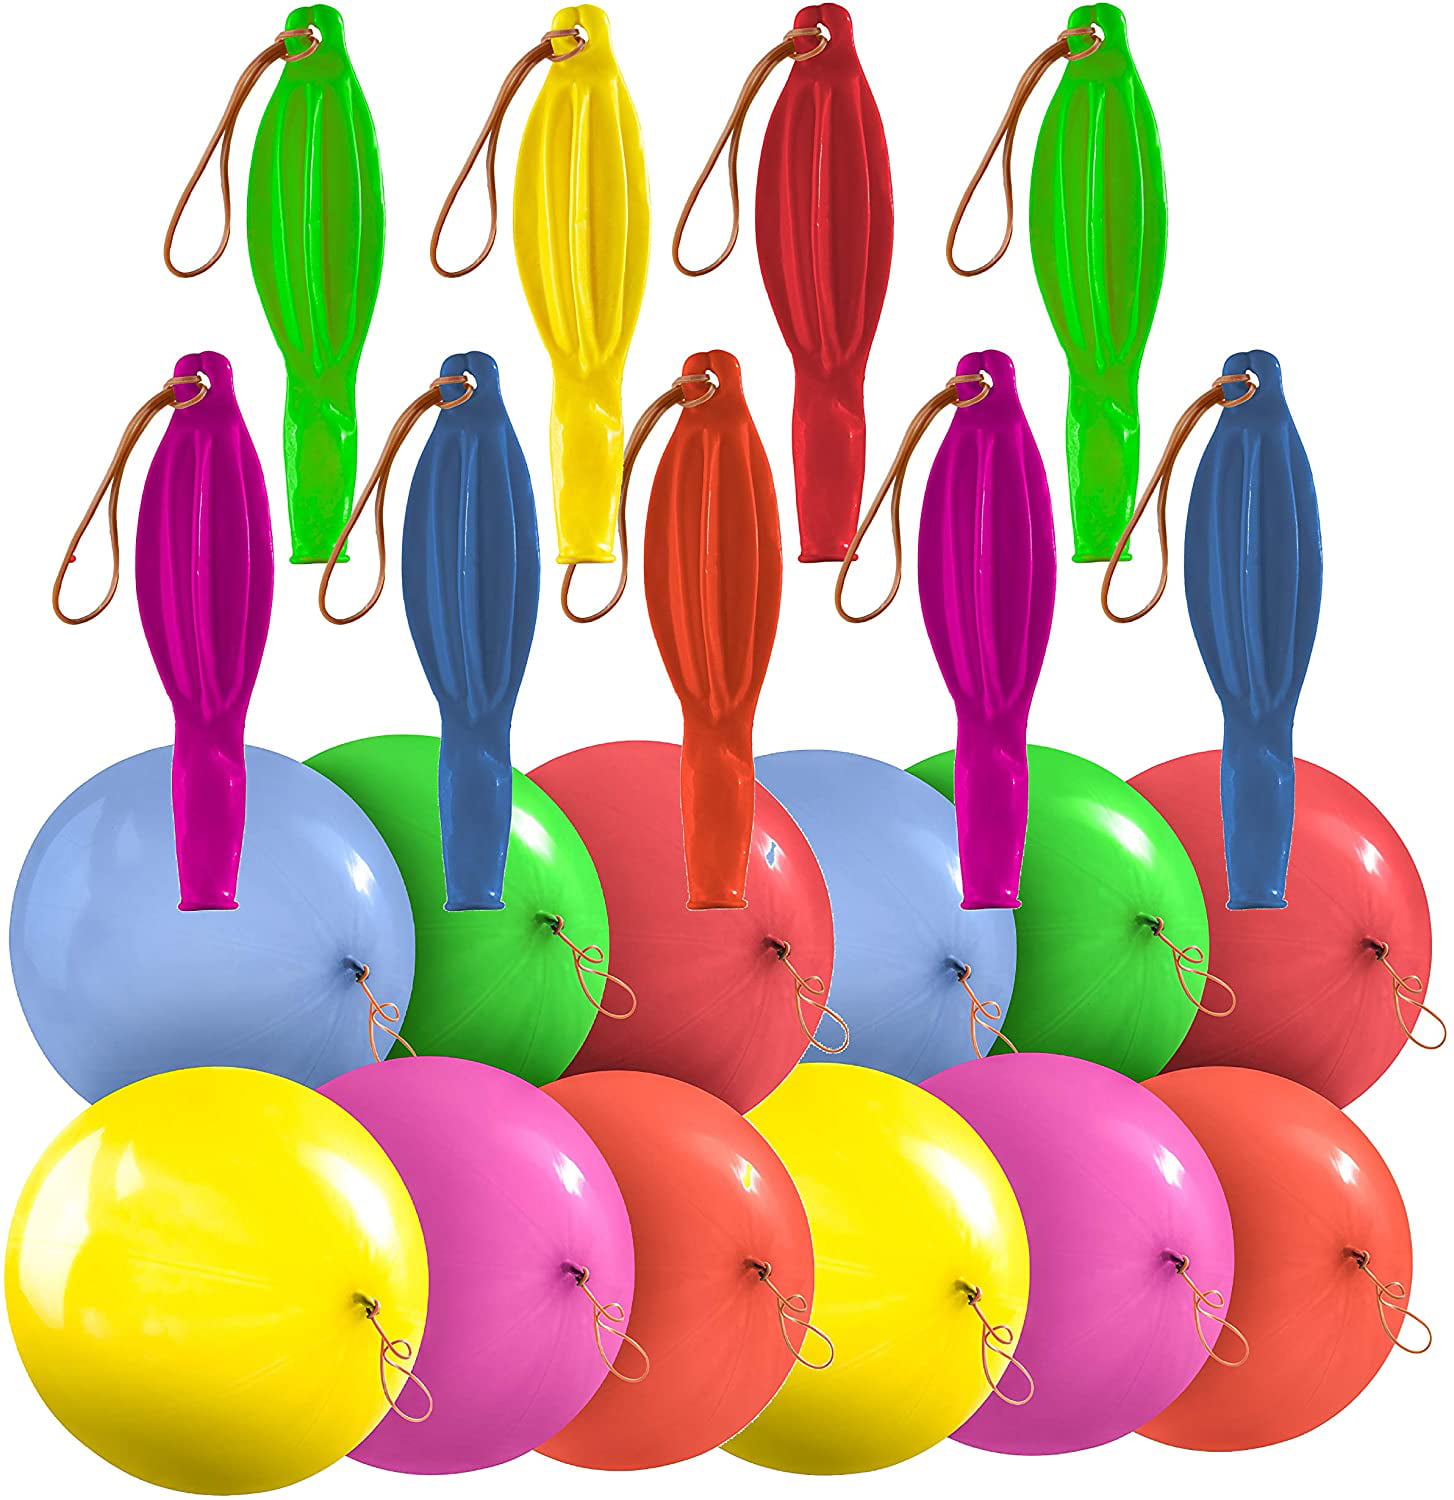 36 Pcs 18 Inch Punch Balloons,Punching Balloon with Rubber Band Handle,Assorted Colors Punch Balls for Kids Party Favors,Gifts and Daily Games 